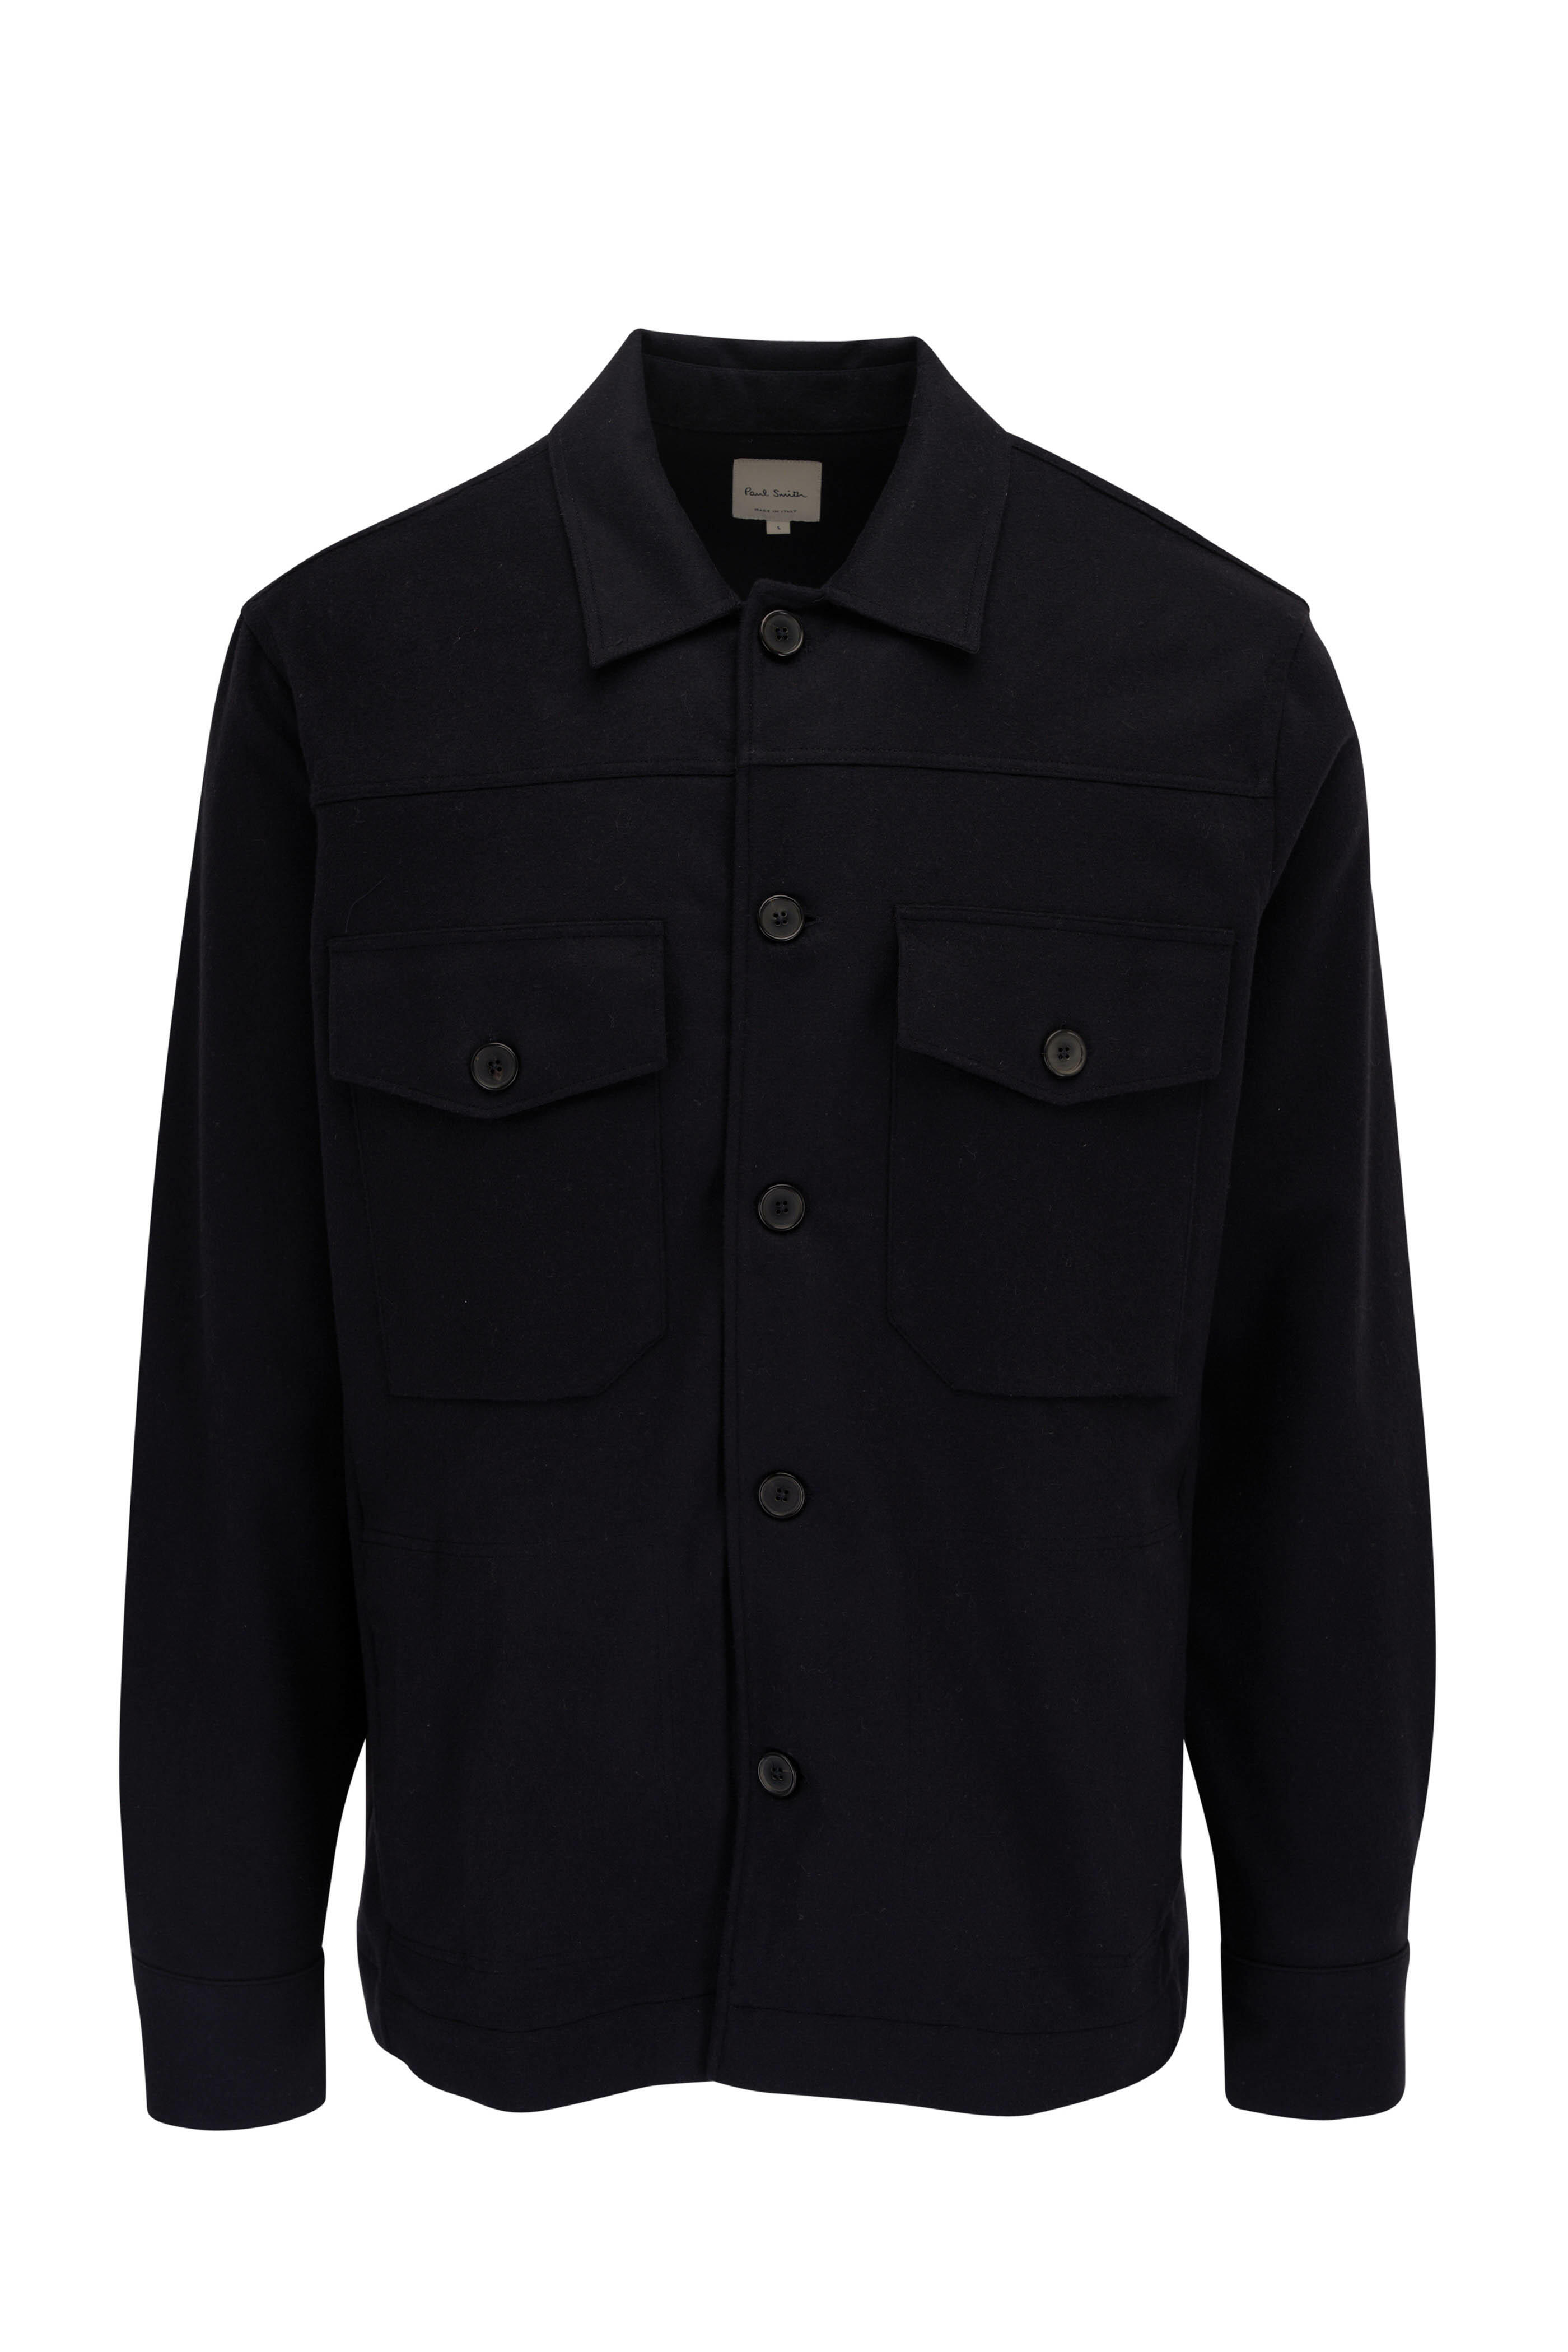 Paul Smith - Navy Blue Wool Shacket | Mitchell Stores